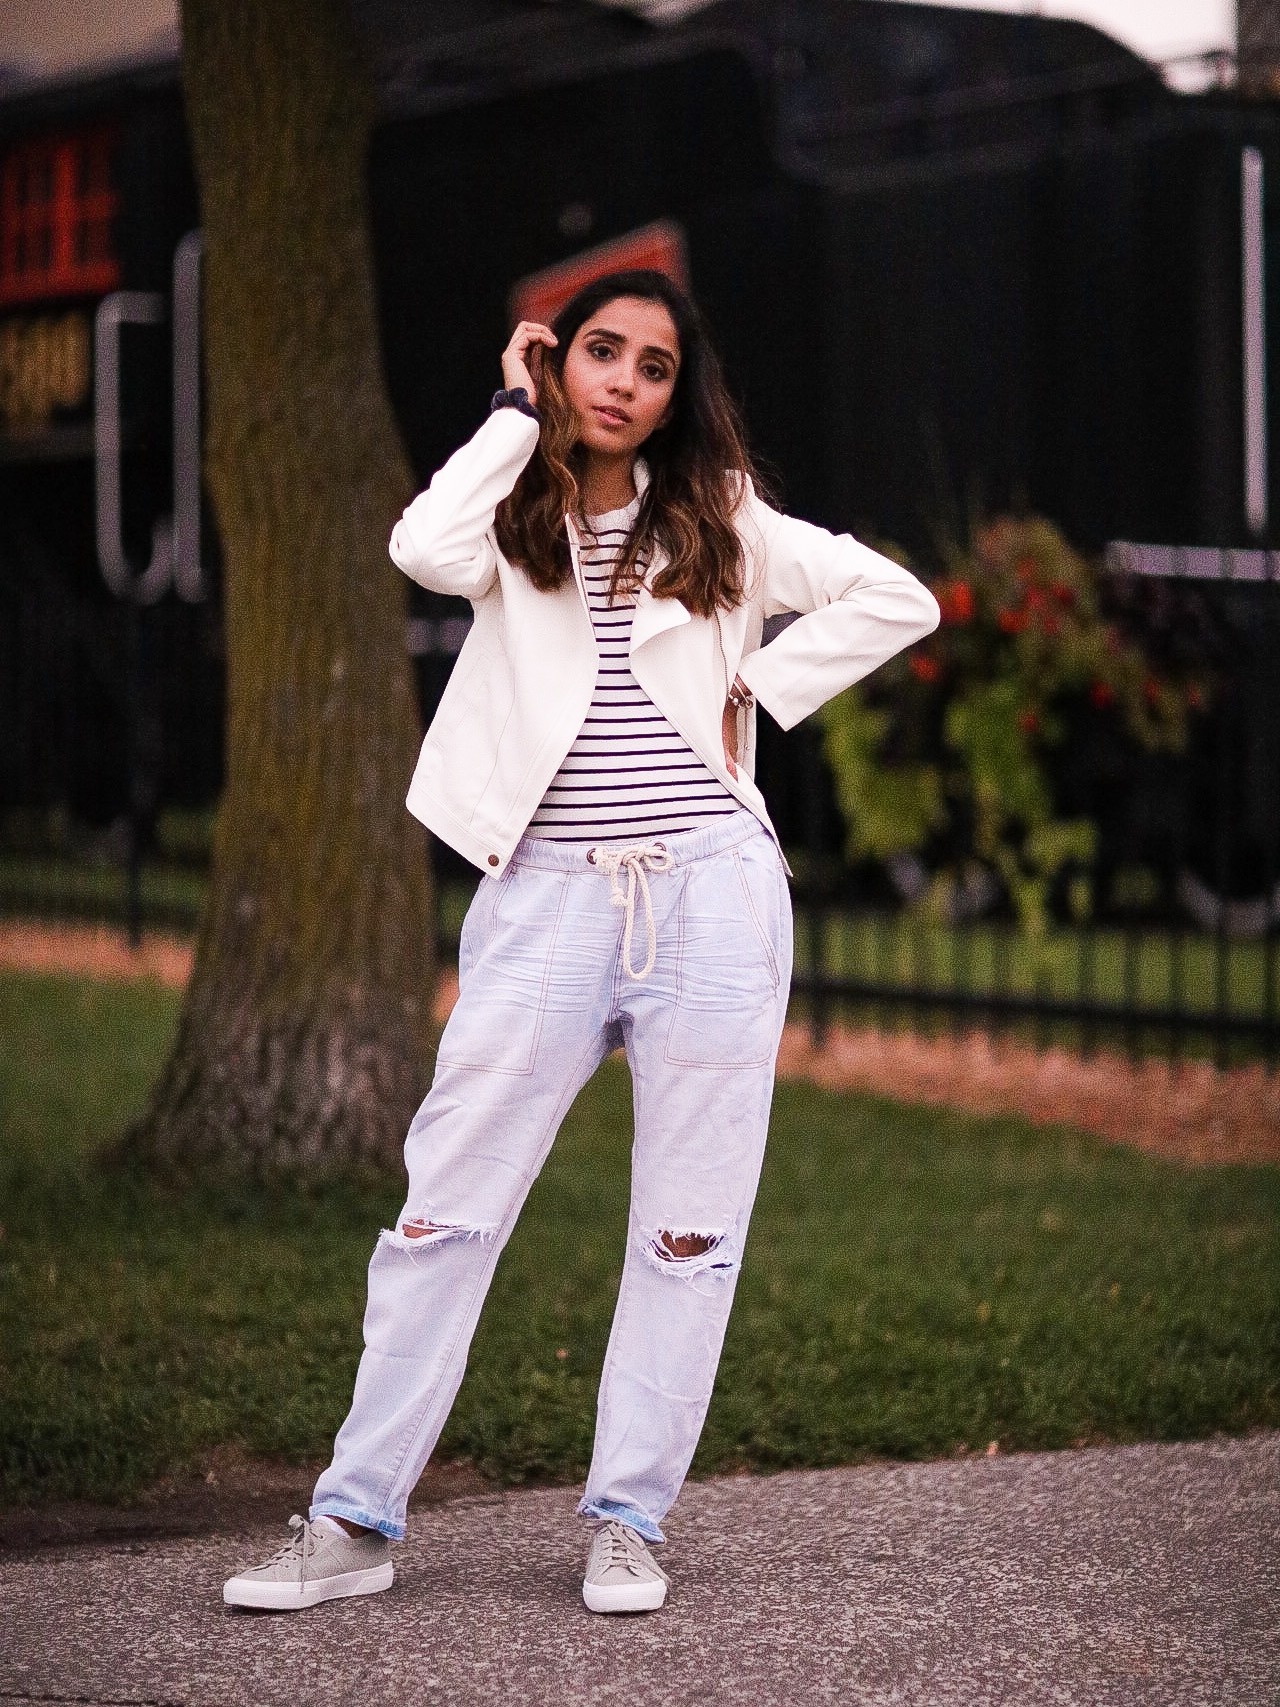 Distressed Jeans for Days Lulus LIGHT WASH DRAWSTRING Faiza Inam Casual Look Summer Fall Fashion Style Toronto Blogger 4